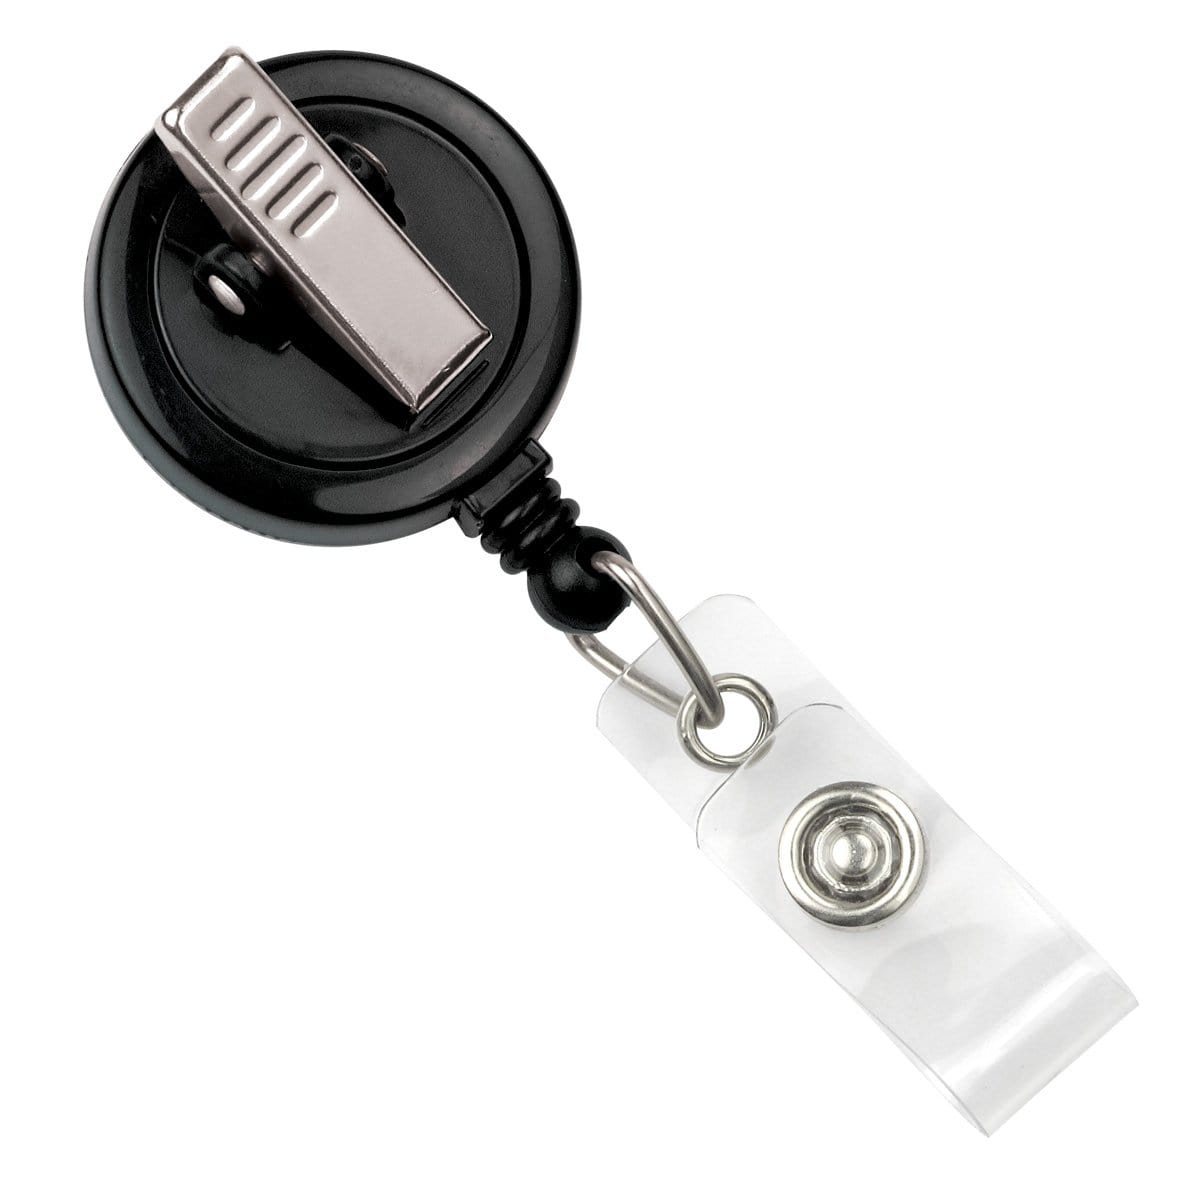 A sleek black and silver Custom Max Label Badge Reel with 1 Inch Smooth Face and Swivel Spring Clip - Personalize with Your Logo that helps promote brand awareness with its professional image. Perfect for custom badge reels.